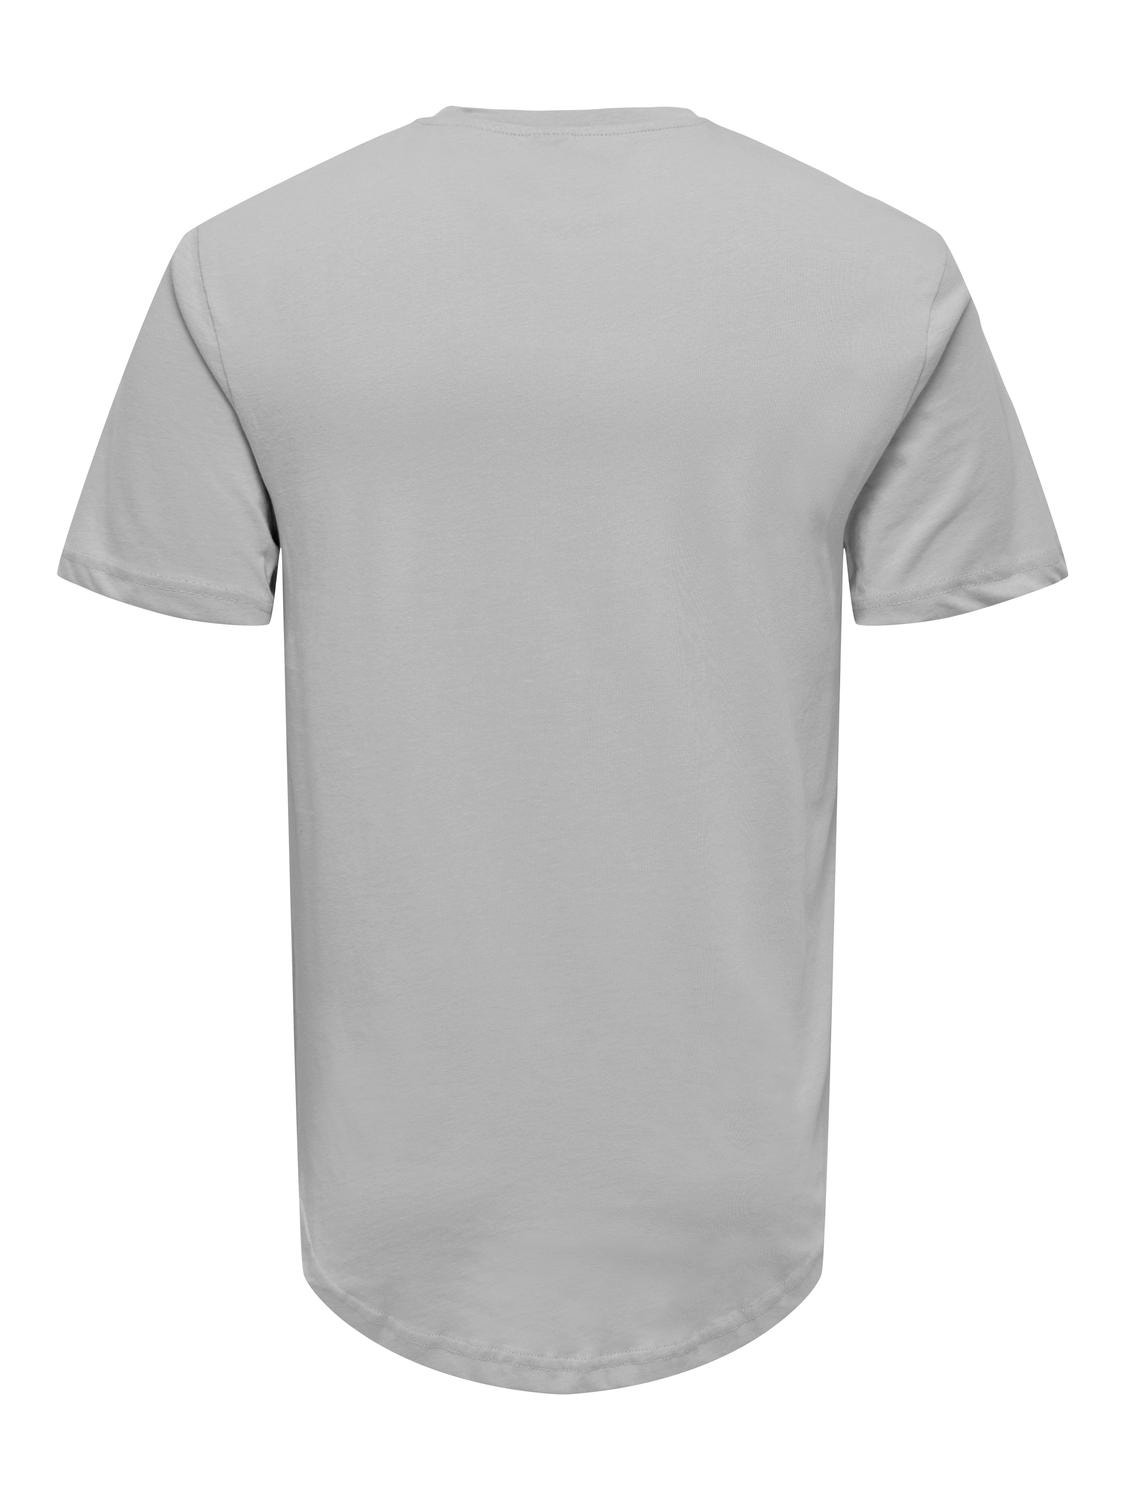 ONLY & SONS Long Line Fit Round Neck T-Shirt -Mirage Gray - 22002973